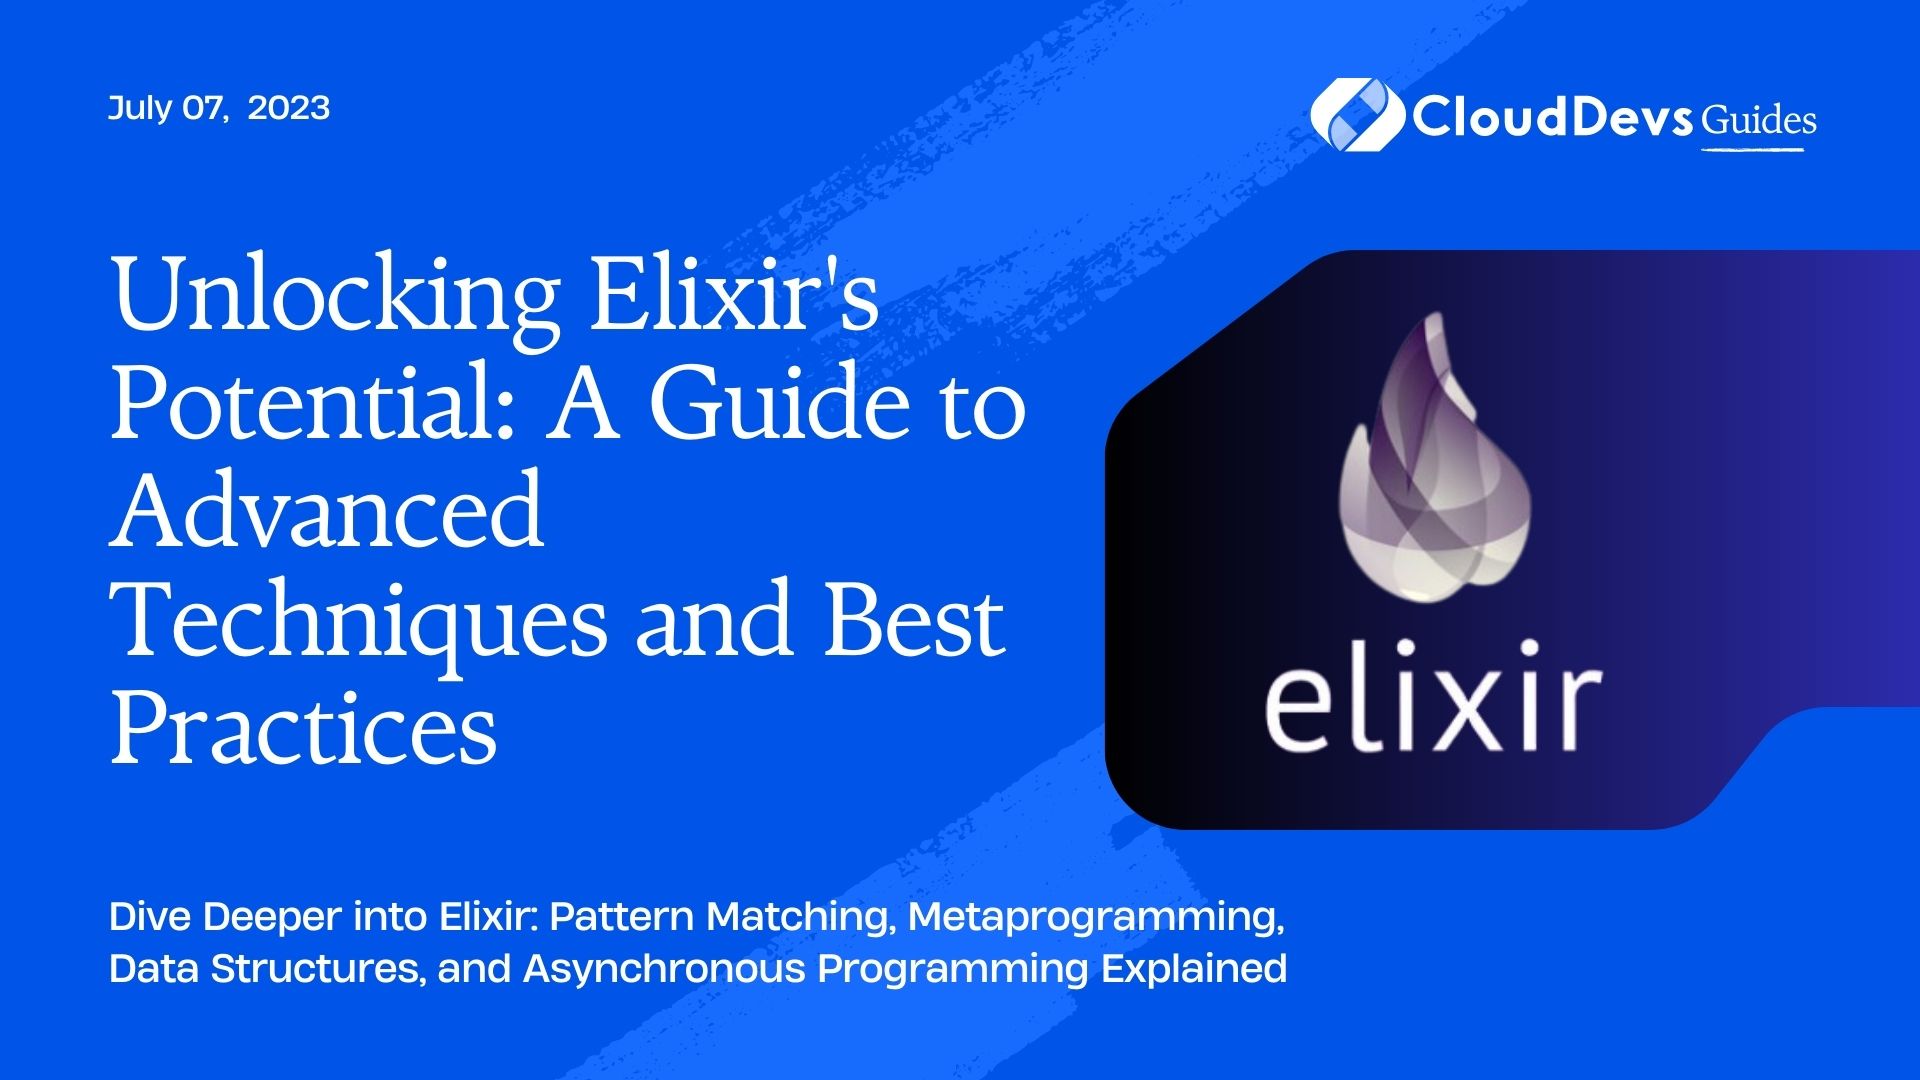 Unlocking Elixir's Potential: A Guide to Advanced Techniques and Best Practices